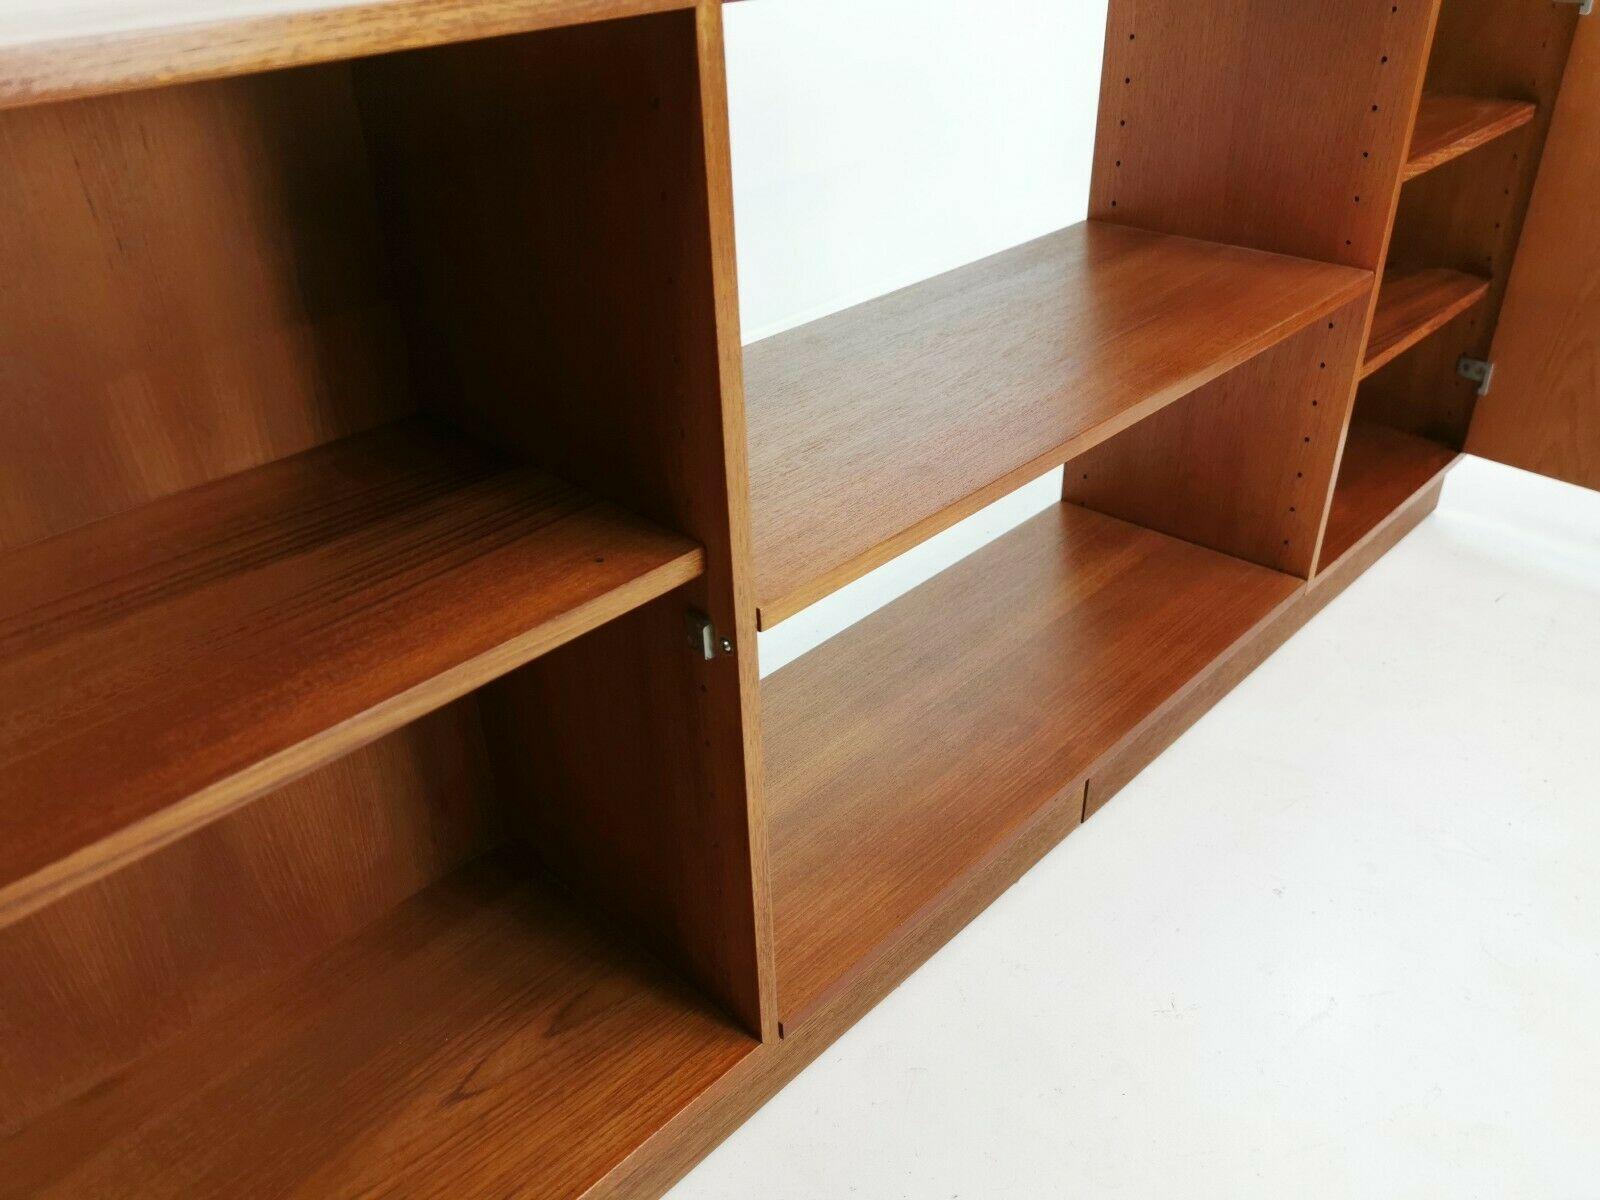 A sideboard from the Diplomat series designed by Finn Juhl produced by Cado in Denmark in the mid-1960s.

Featuring two cabinets and a centre bookcase / display section.

Made in teak.

Measures: 74 cm height x 31 cm depth x 170 cm